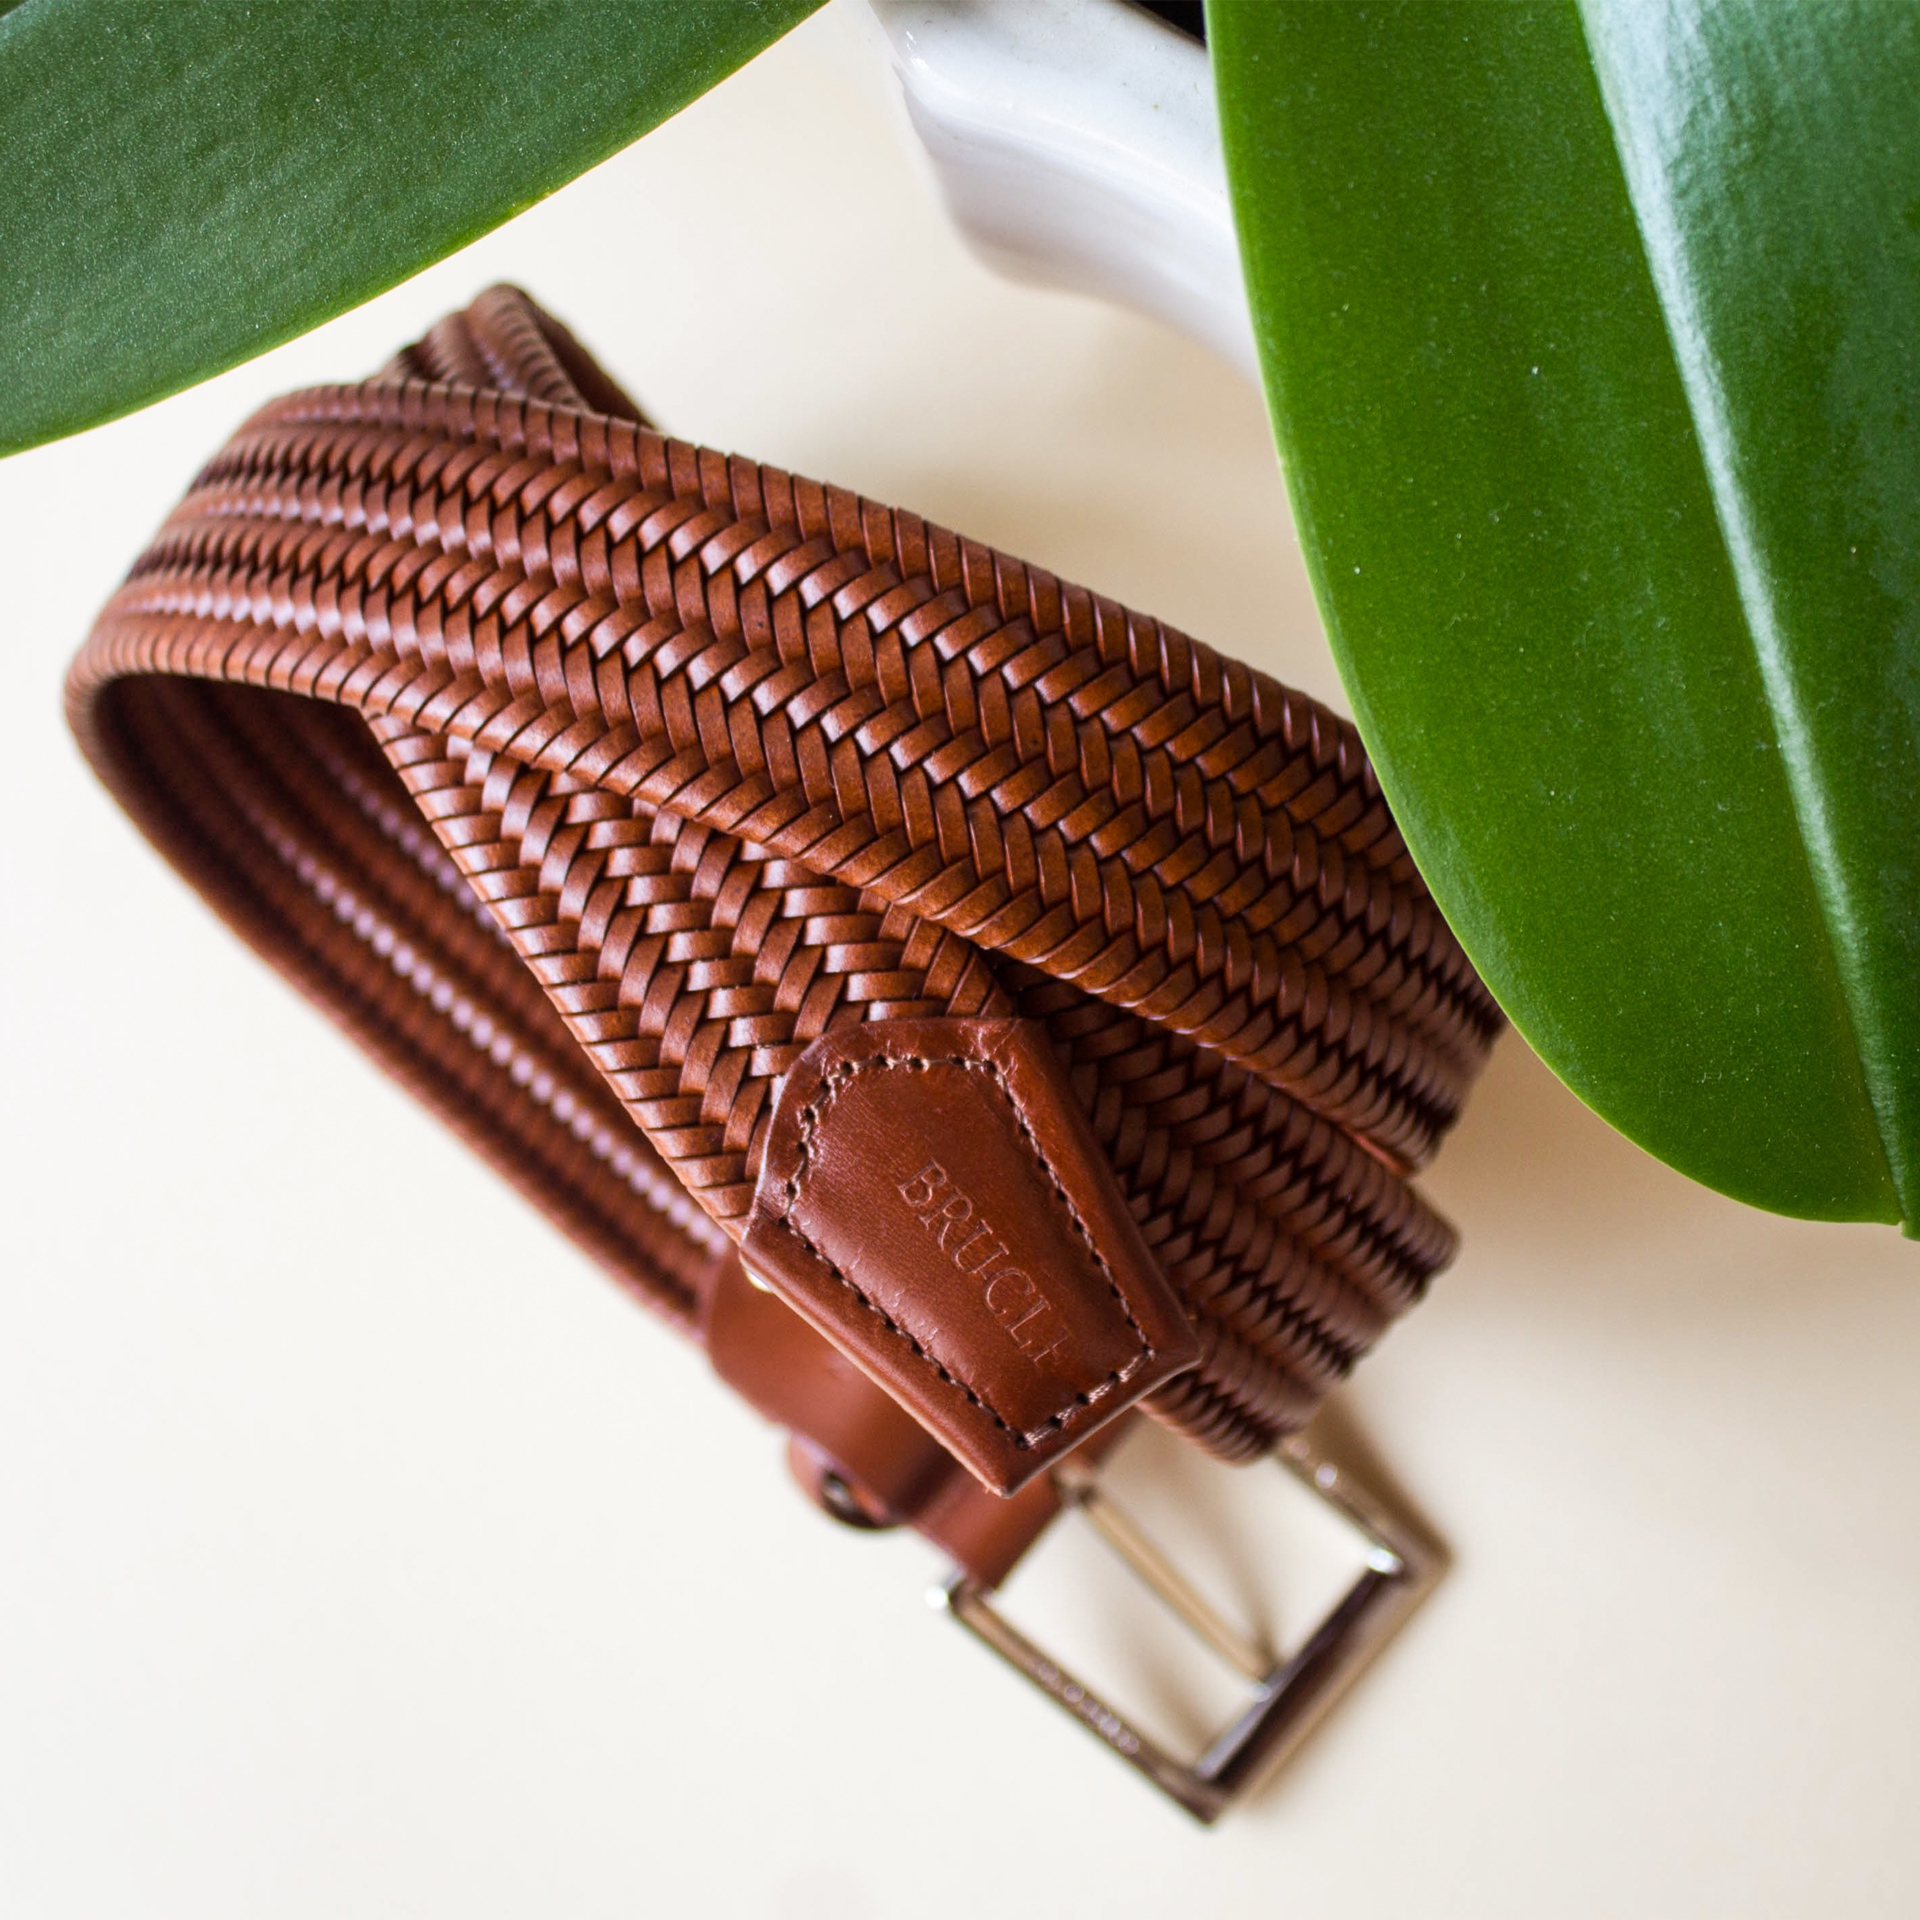 Anderson's Woven Leather Belt 3 cm Dark Brown at